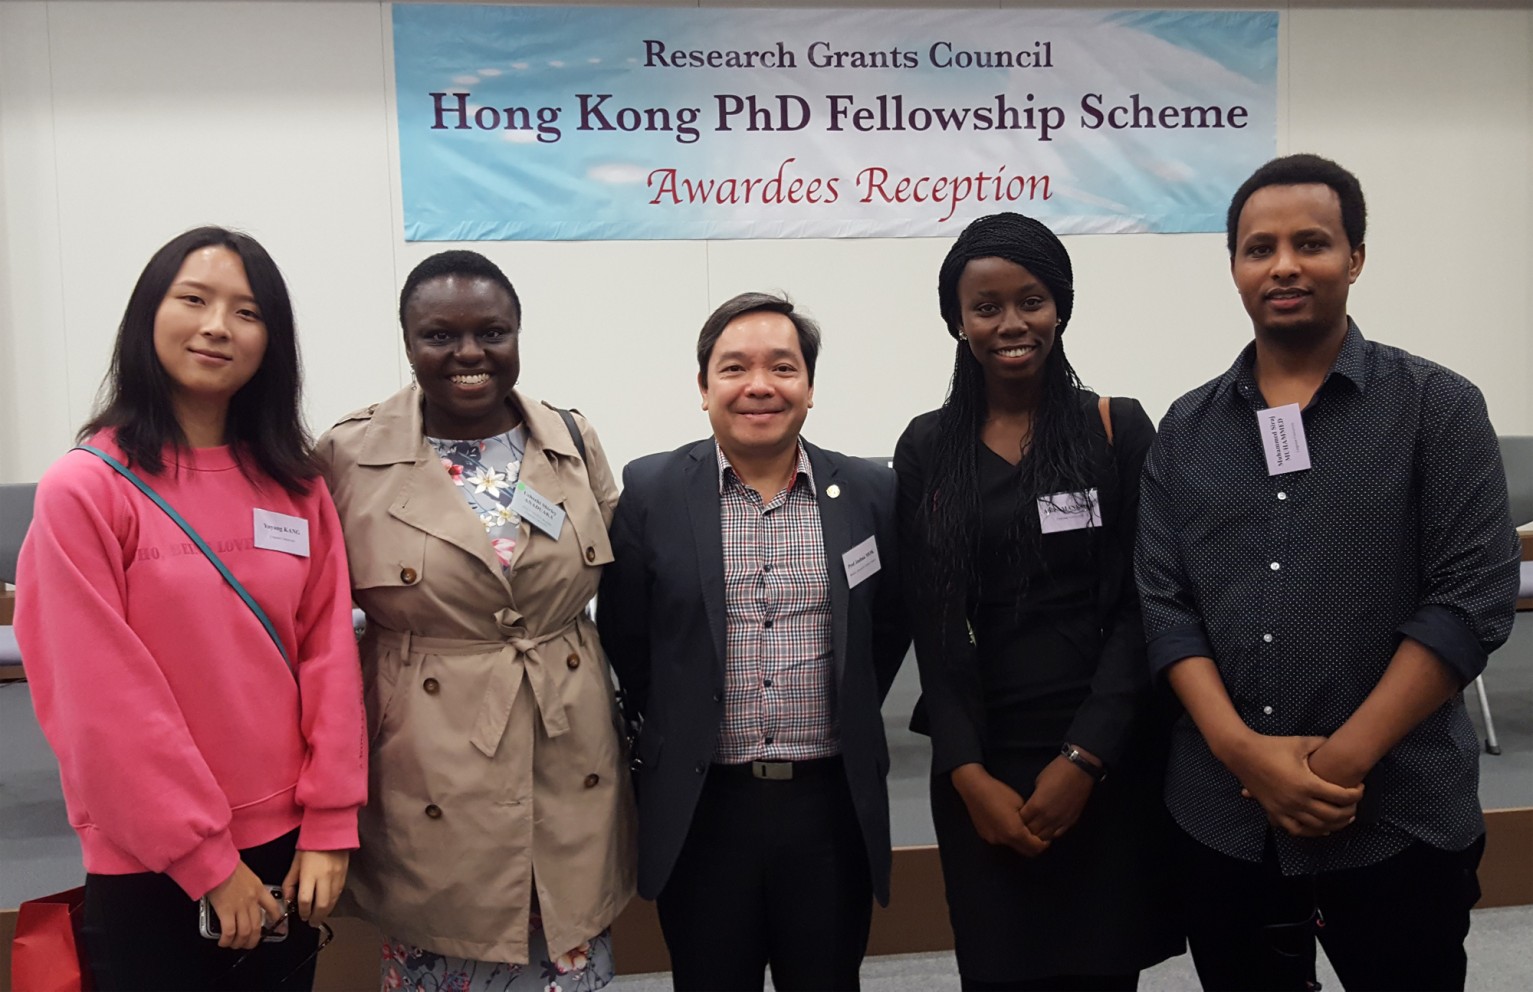 PhD students at Lingnan obtain fellowships from Research Grants Council